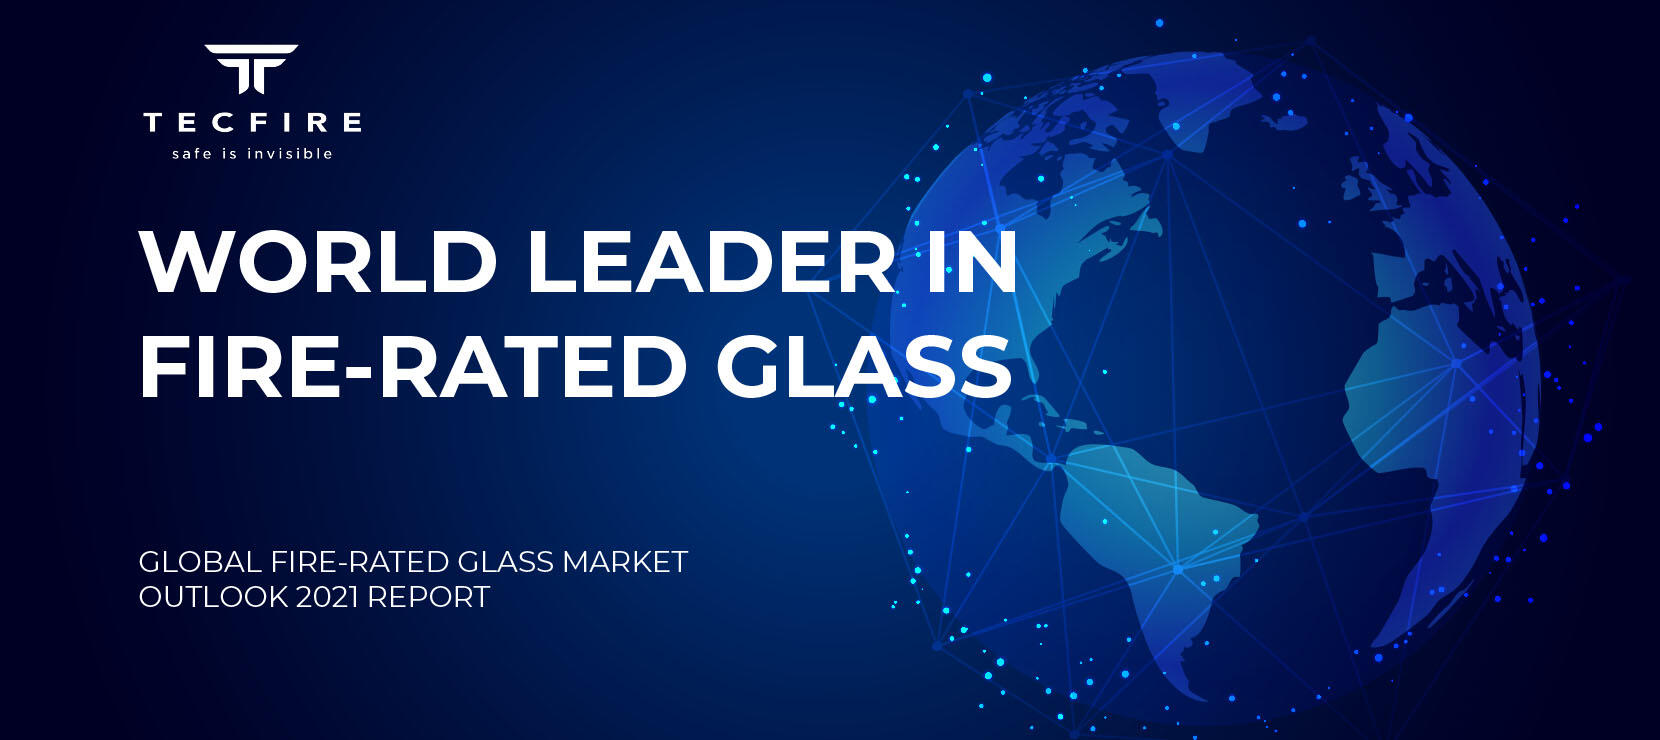 World Leader in Fire-rated Glass